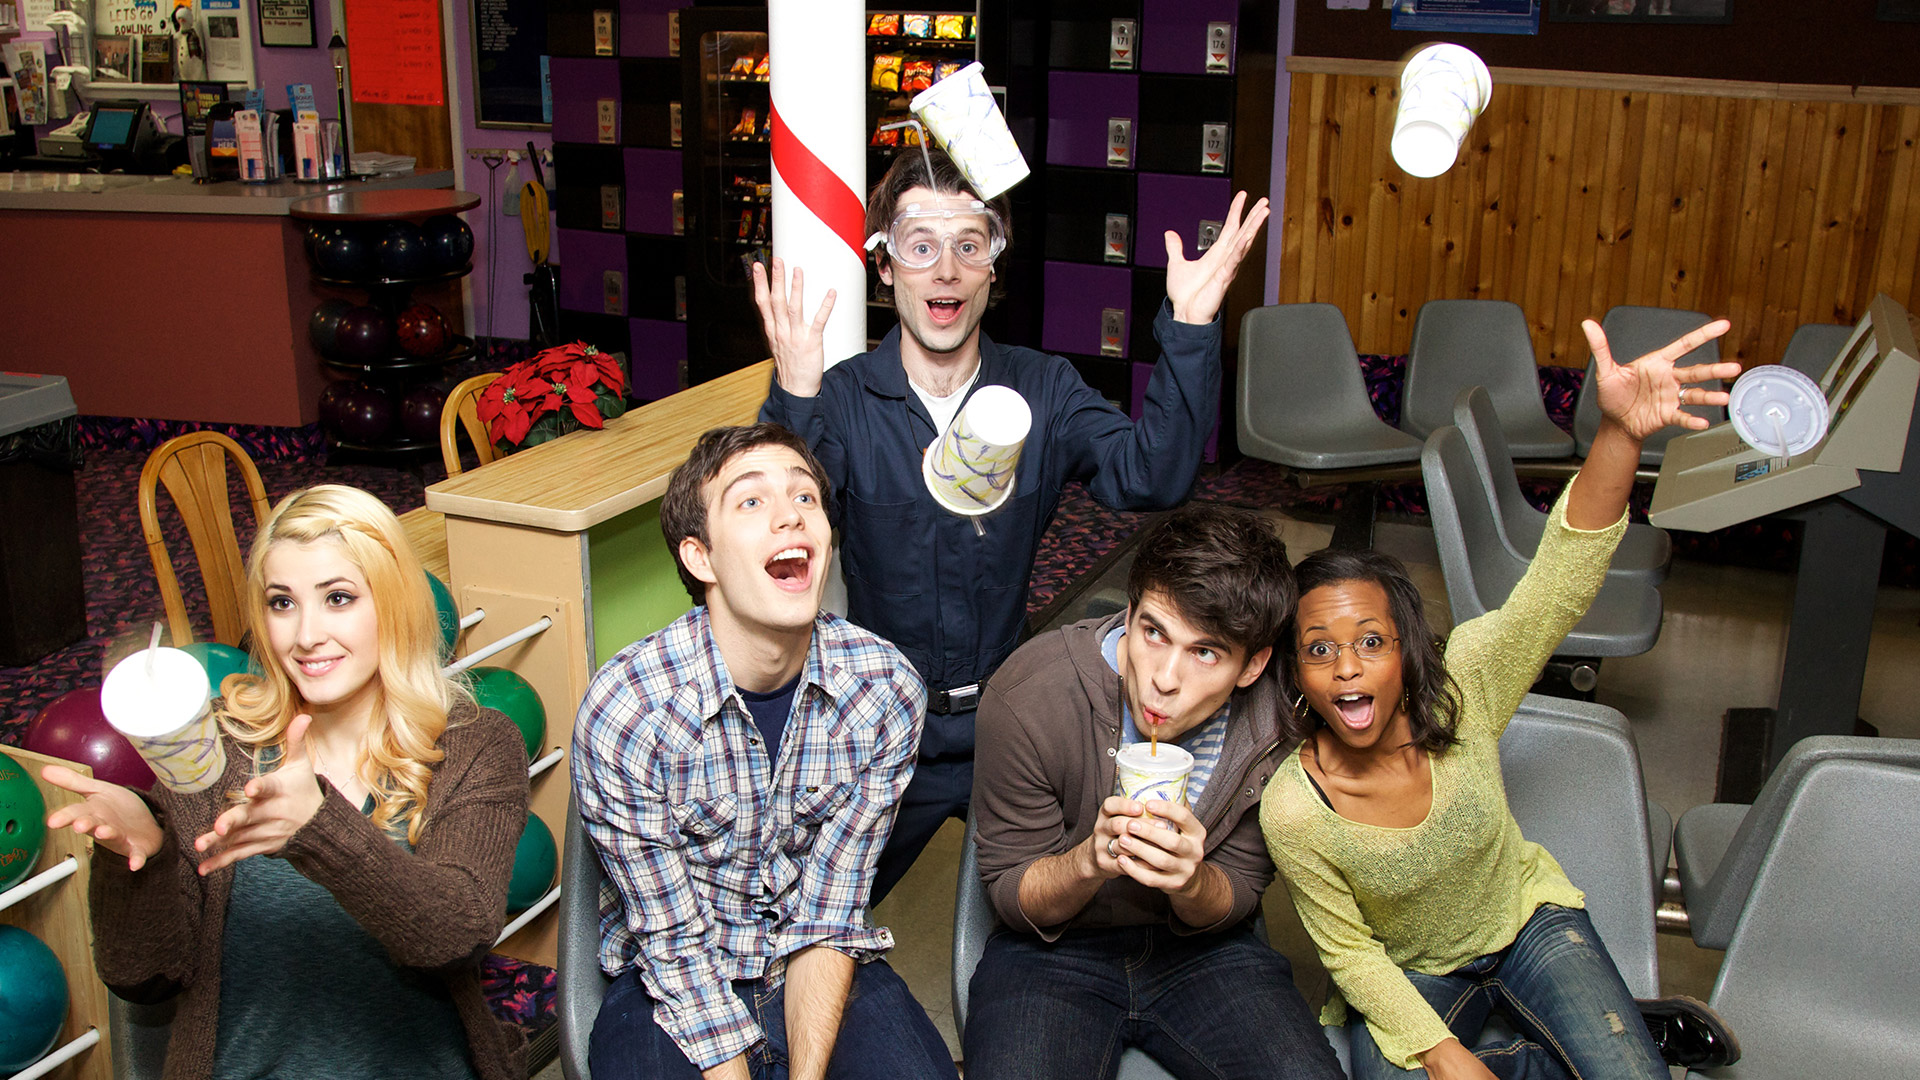 Tim Kubart and the Space Cadets. They are sitting in a bowling alley and cups have been thrown in the air.